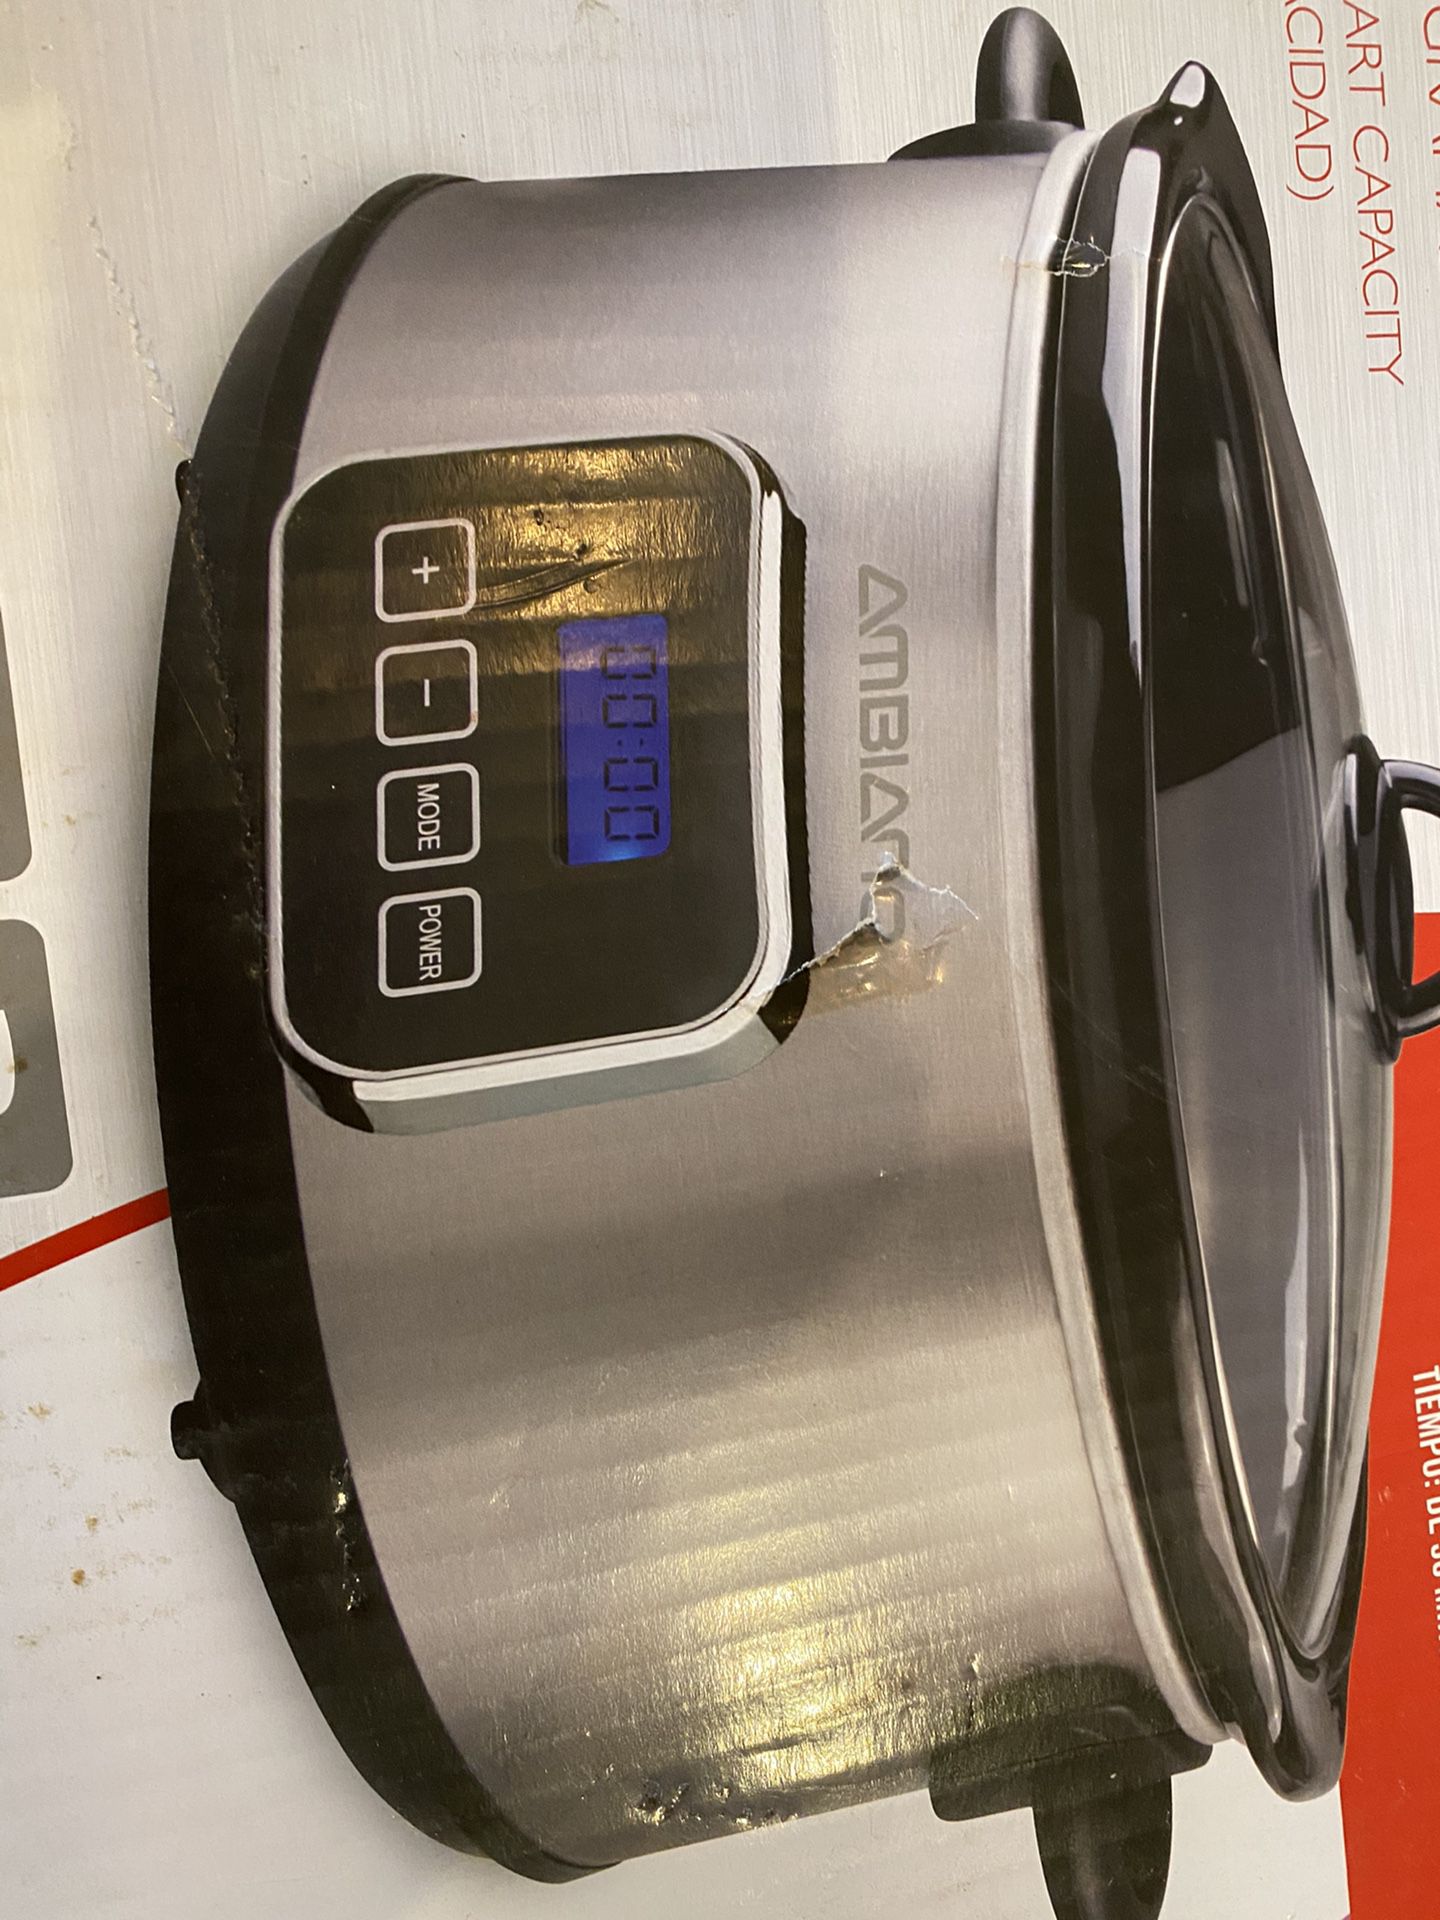 Ambiano programmable slow cooker, new